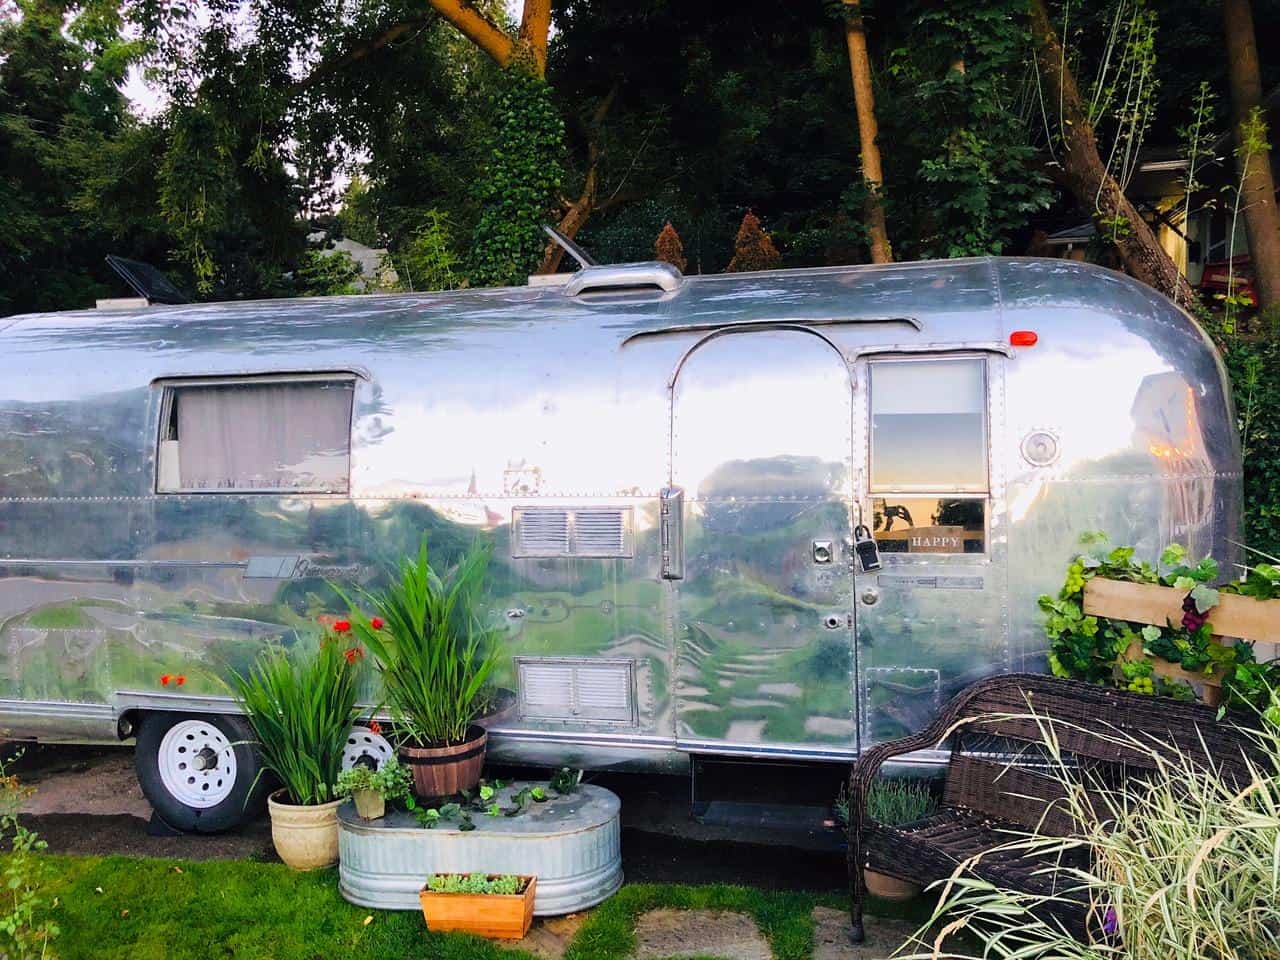 1966 Airstream 26FT Land Yacht For Sale in Spokane - Airstream Marketplace